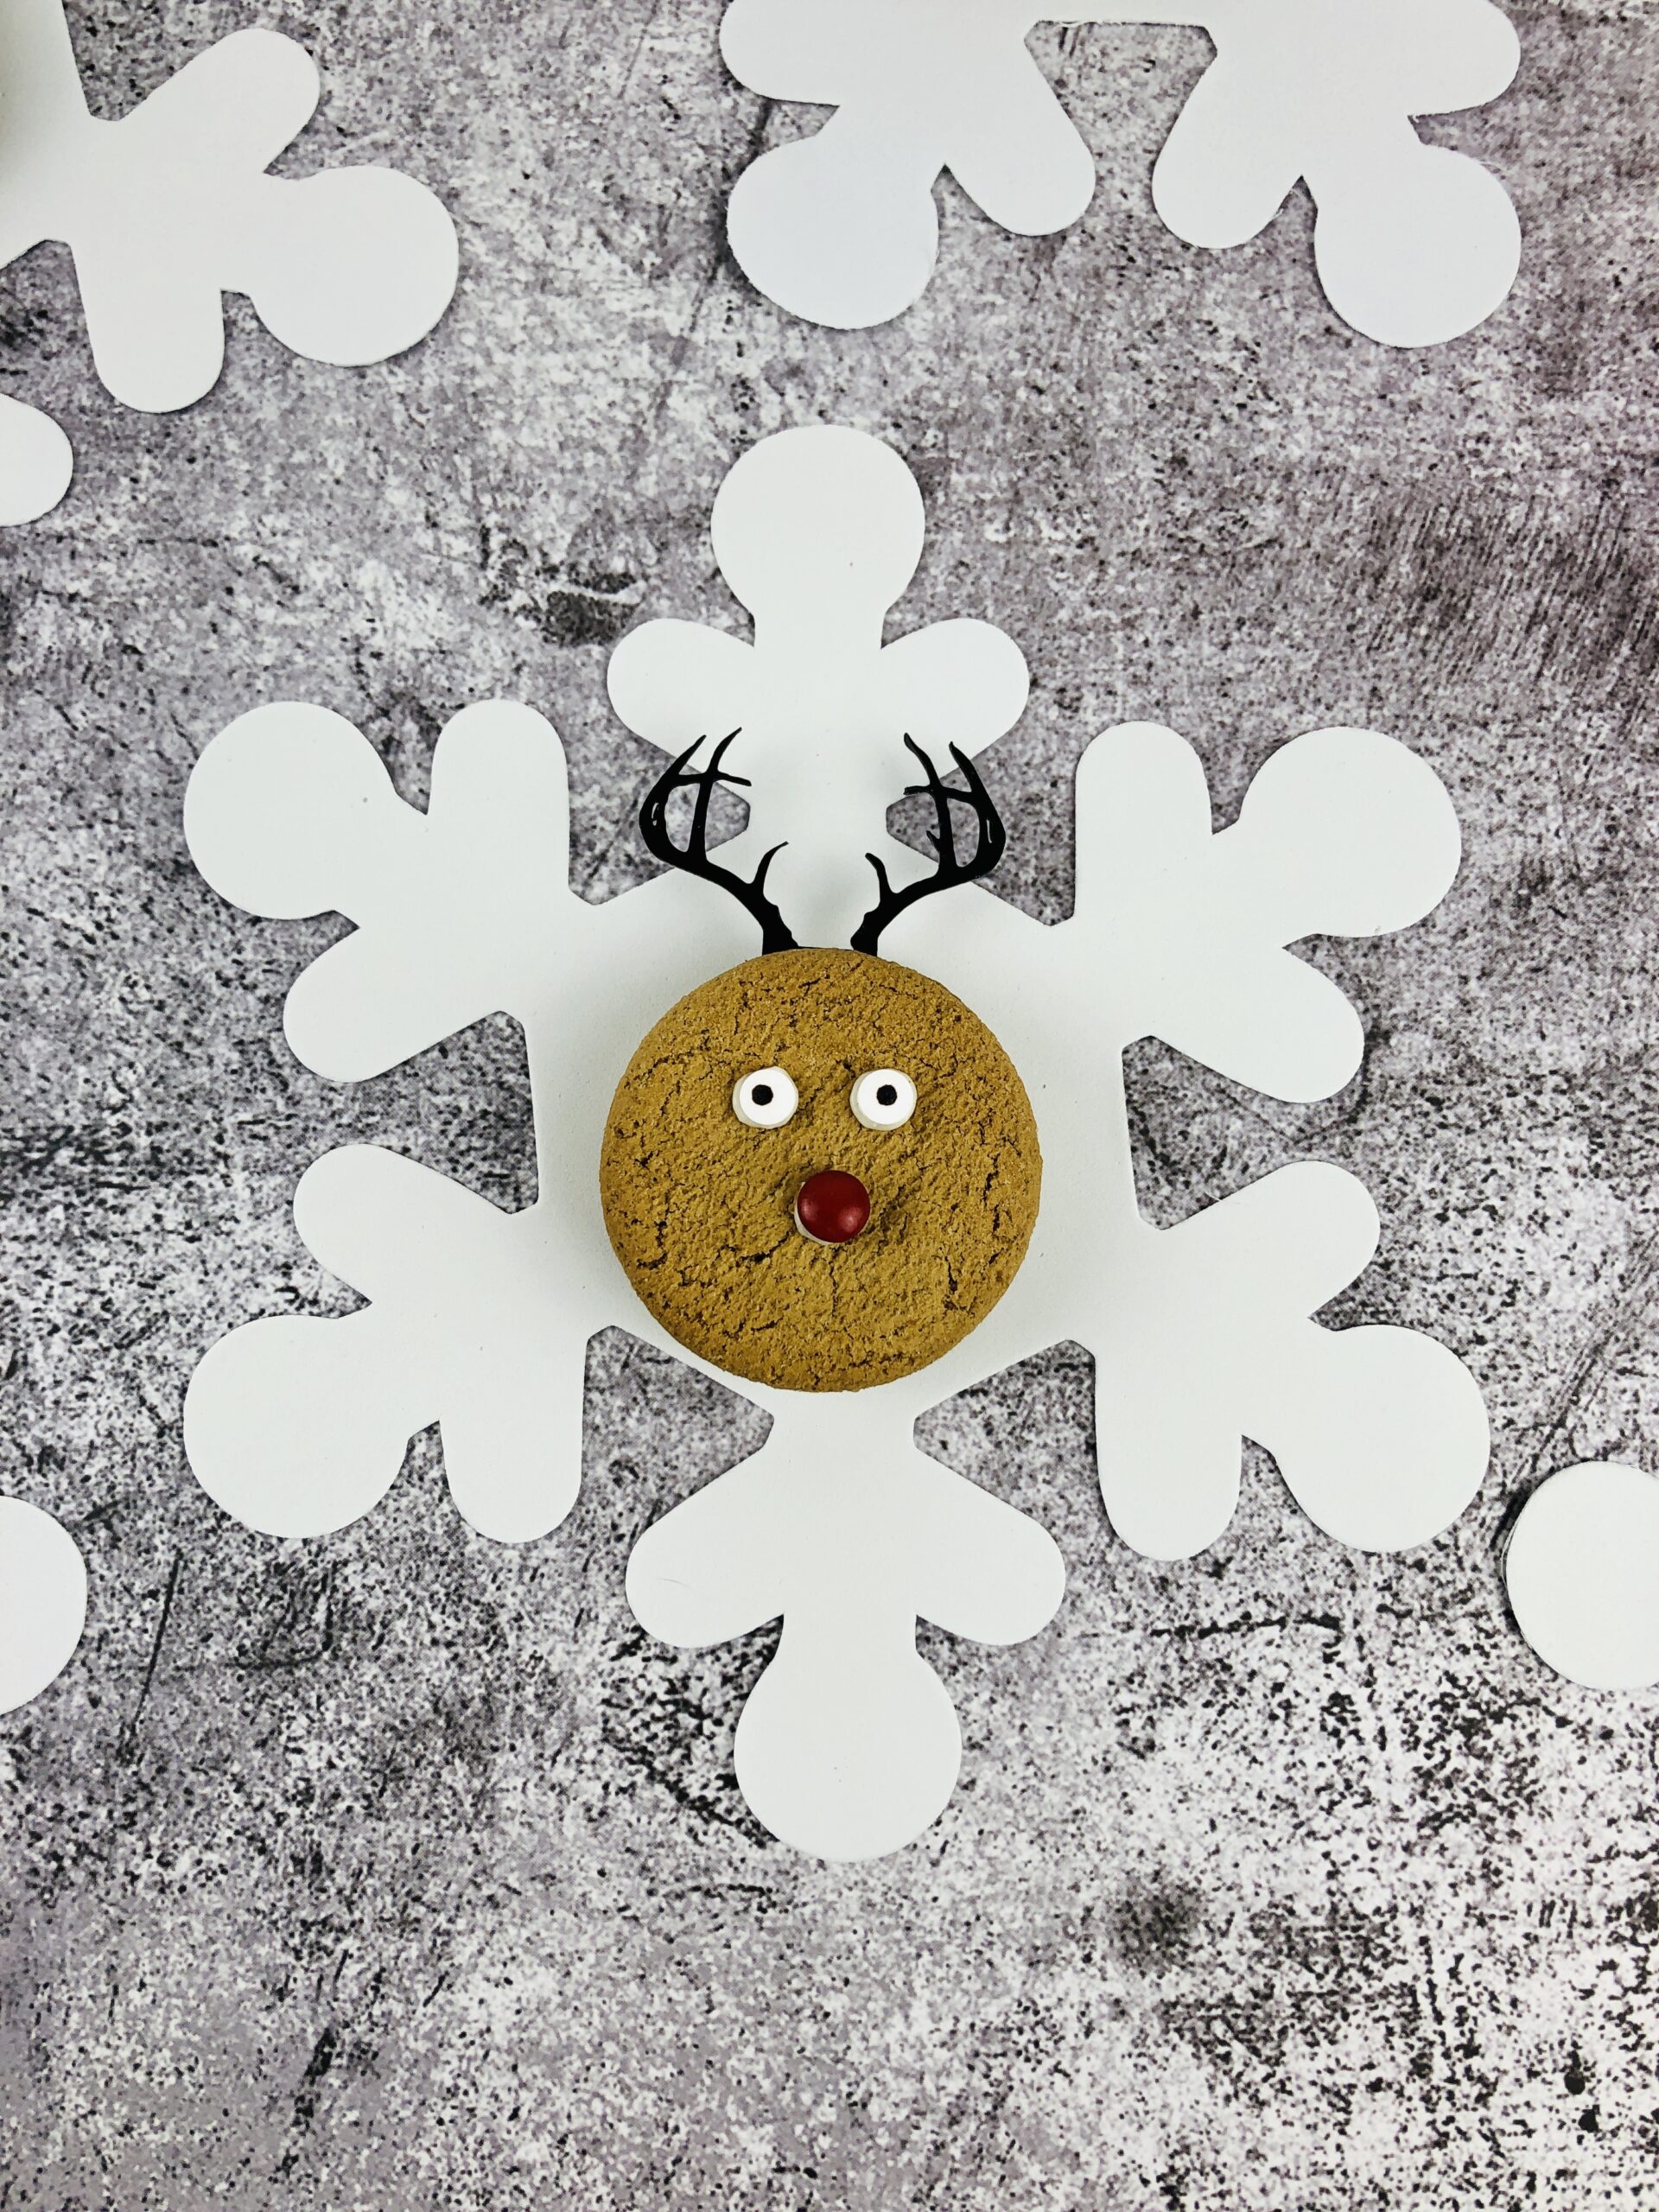 A gingerbread reindeer cookie on a snow flake.